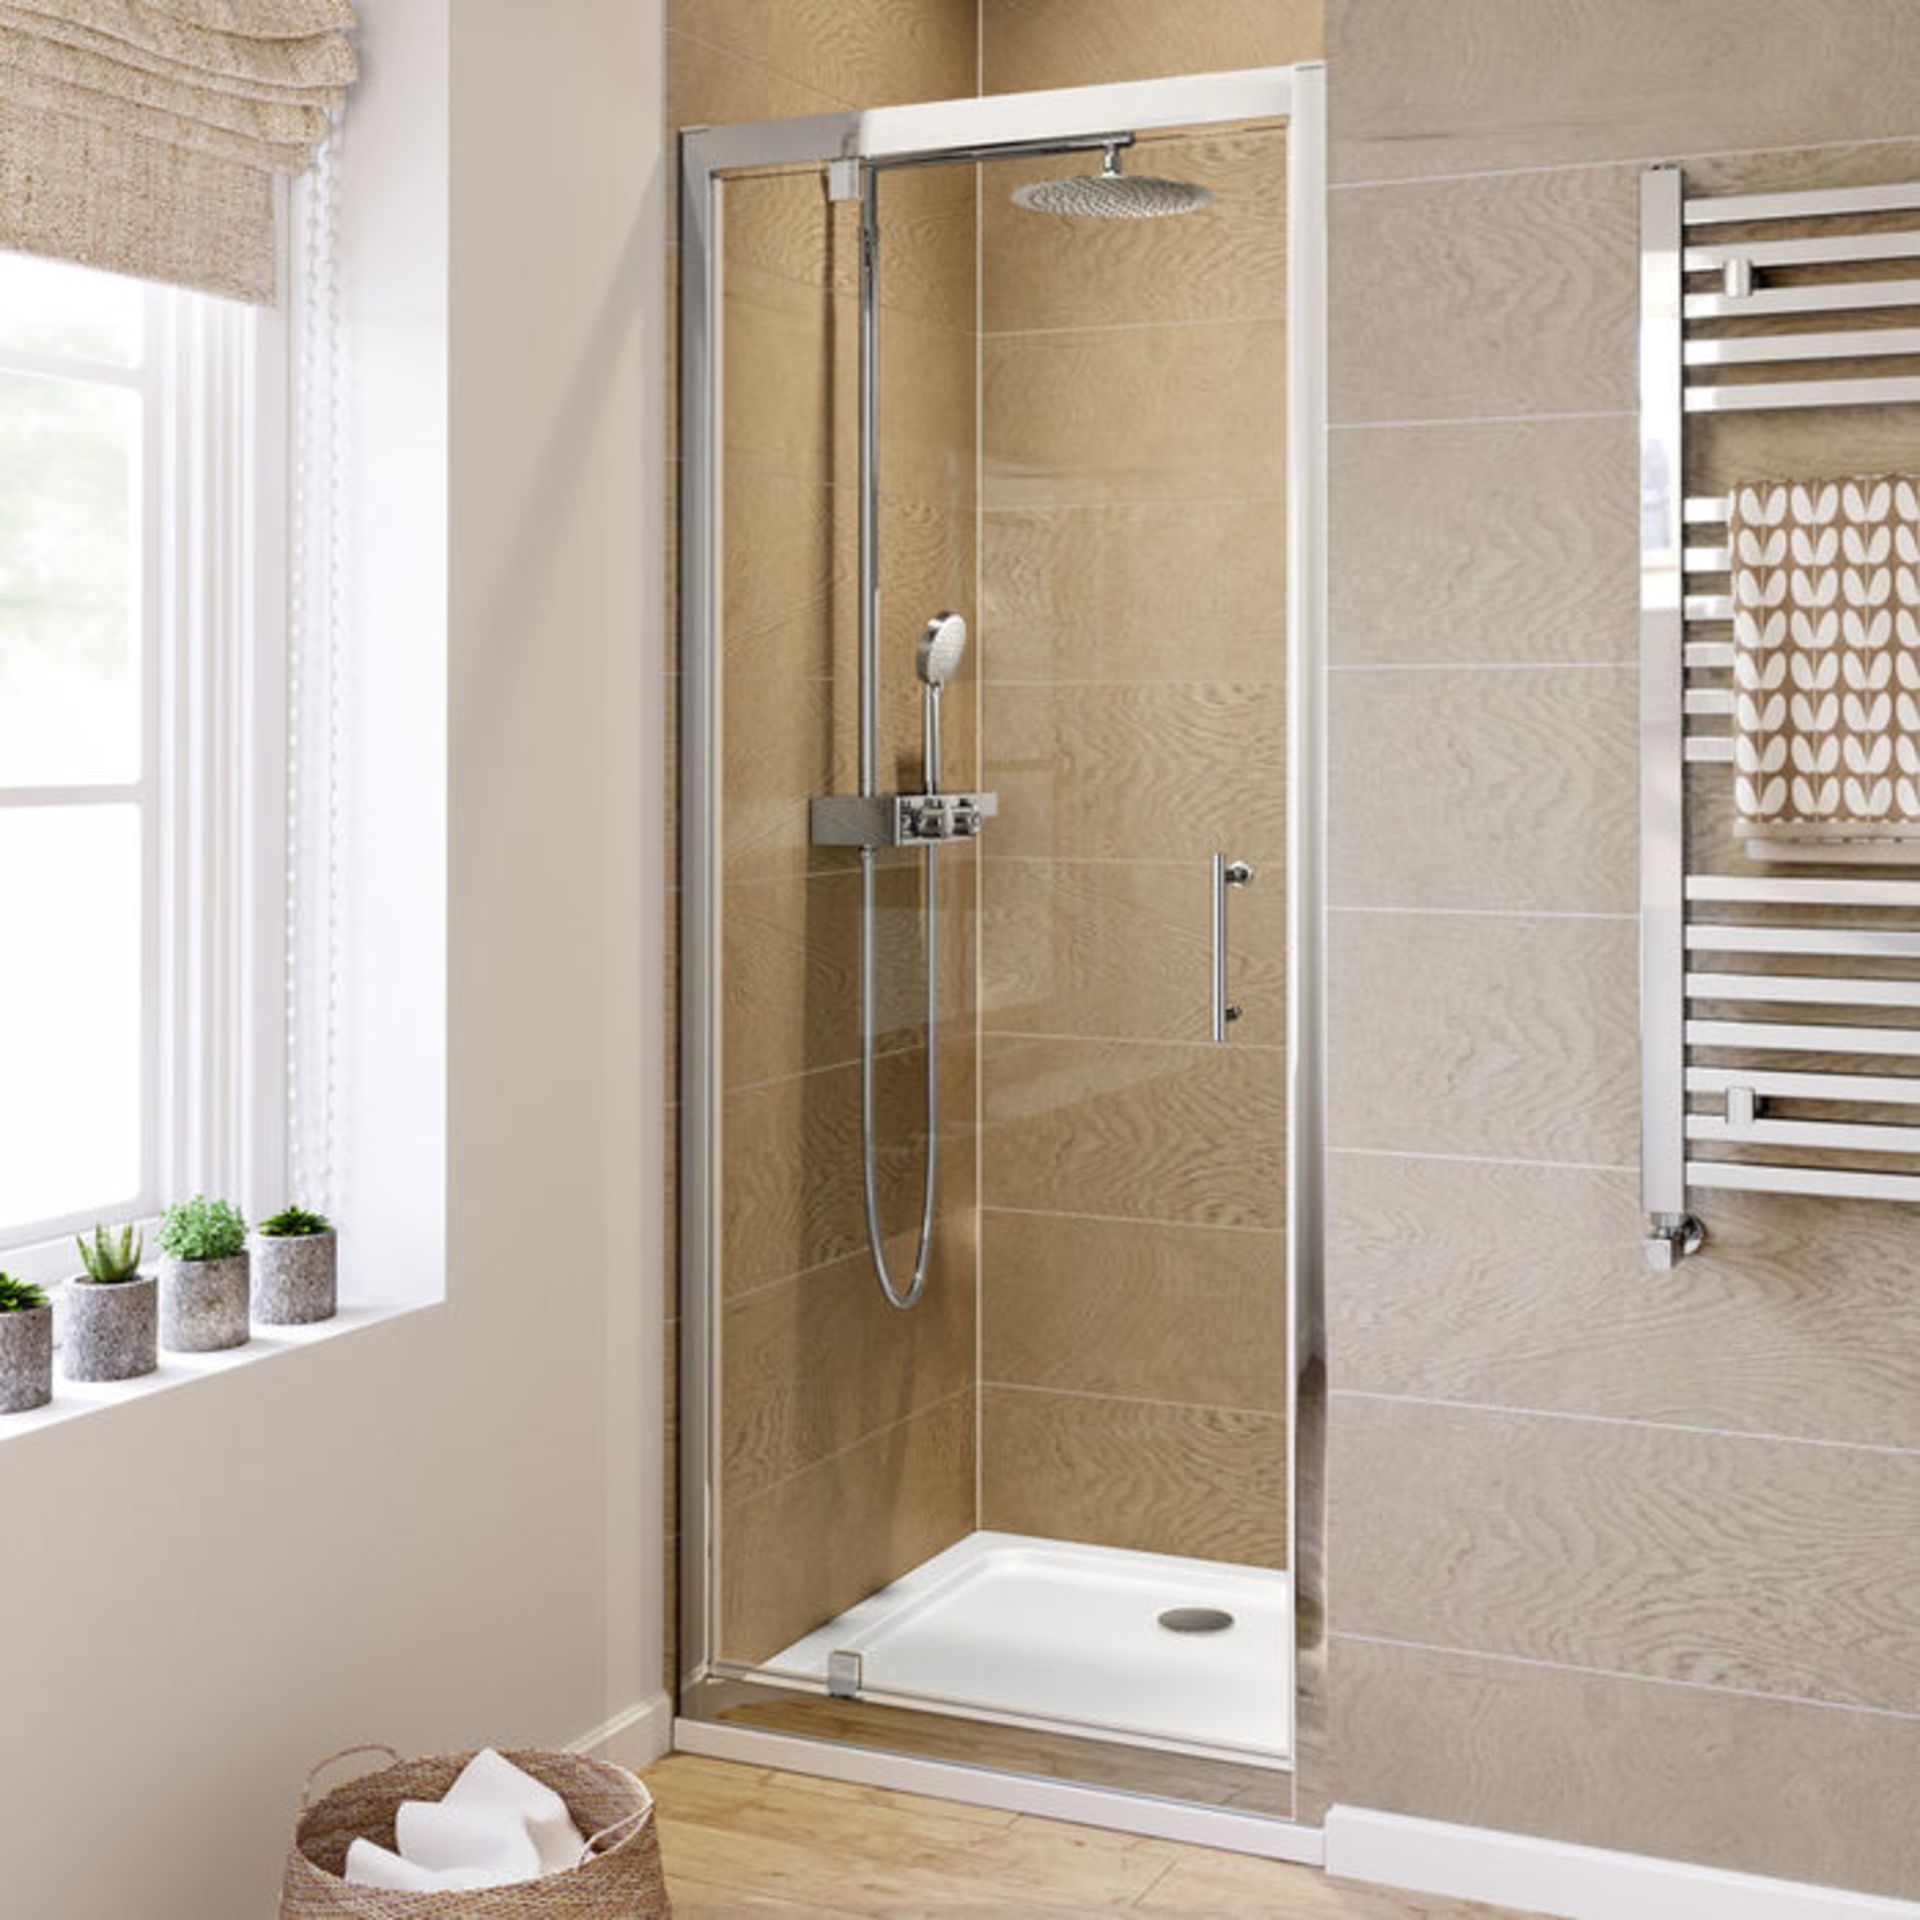 (VN27) 900mm - 6mm - Elements Pivot Shower Door. RRP £299.99. 6mm Safety Glass Fully waterproof - Image 2 of 5